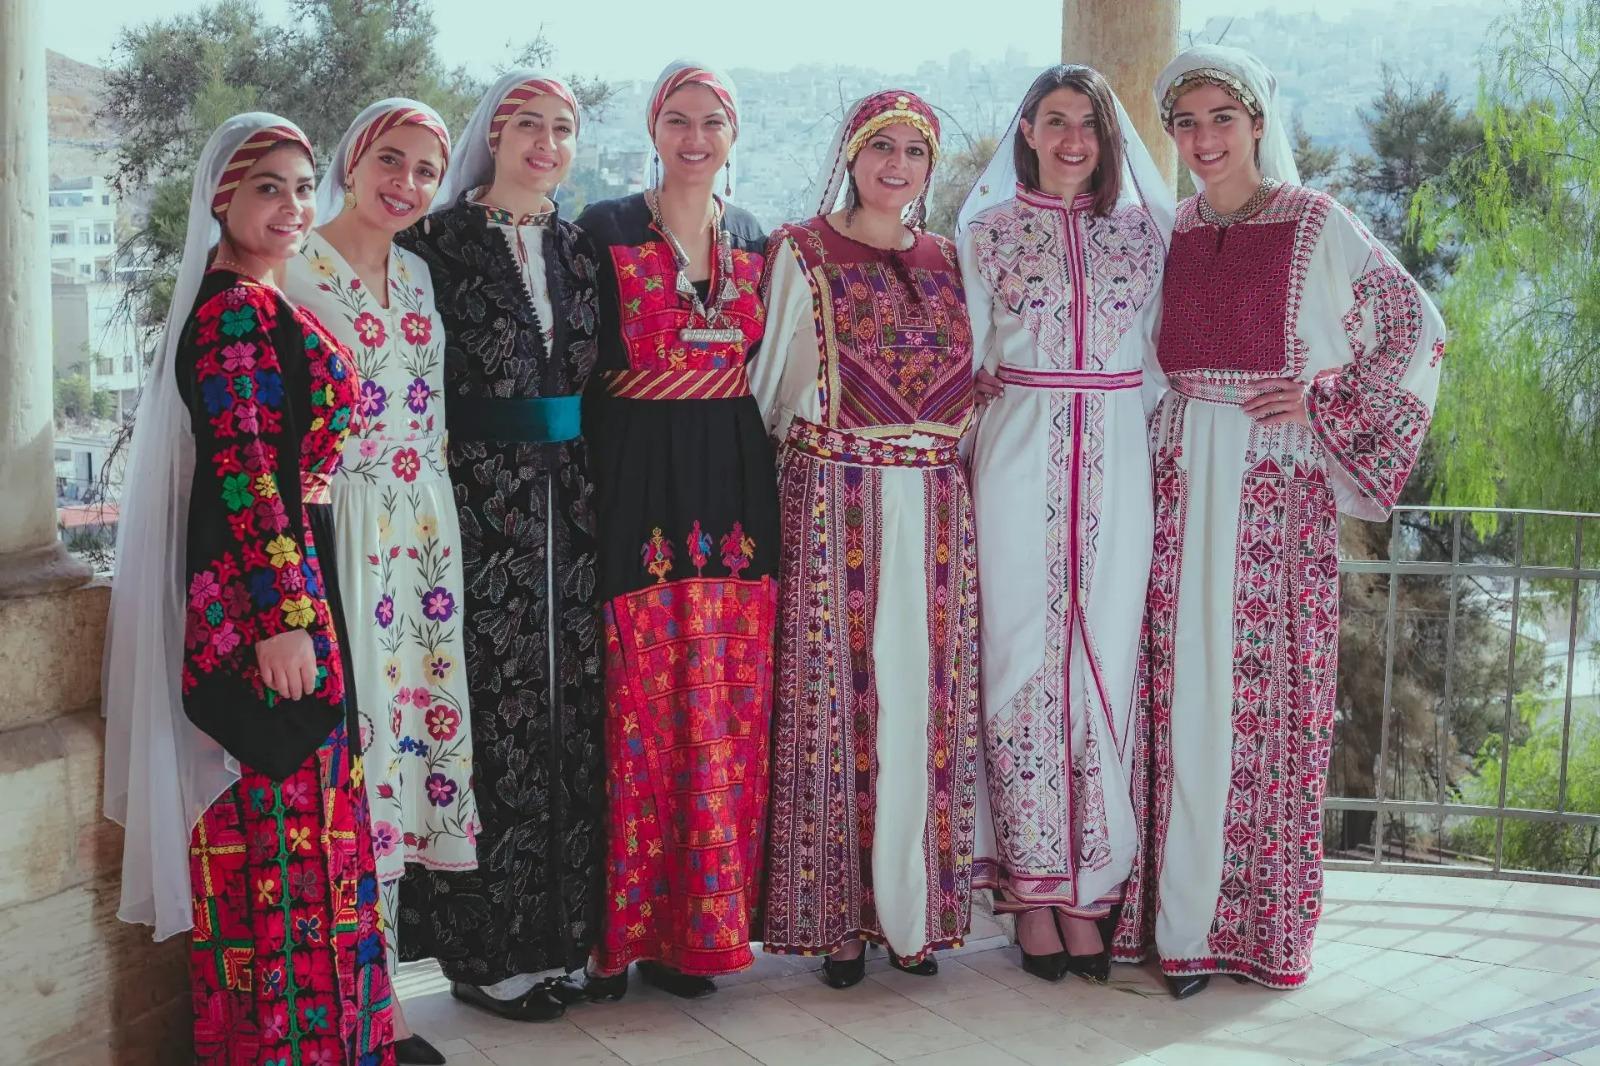 The story of the Palestinian clothing from its origins until the wars